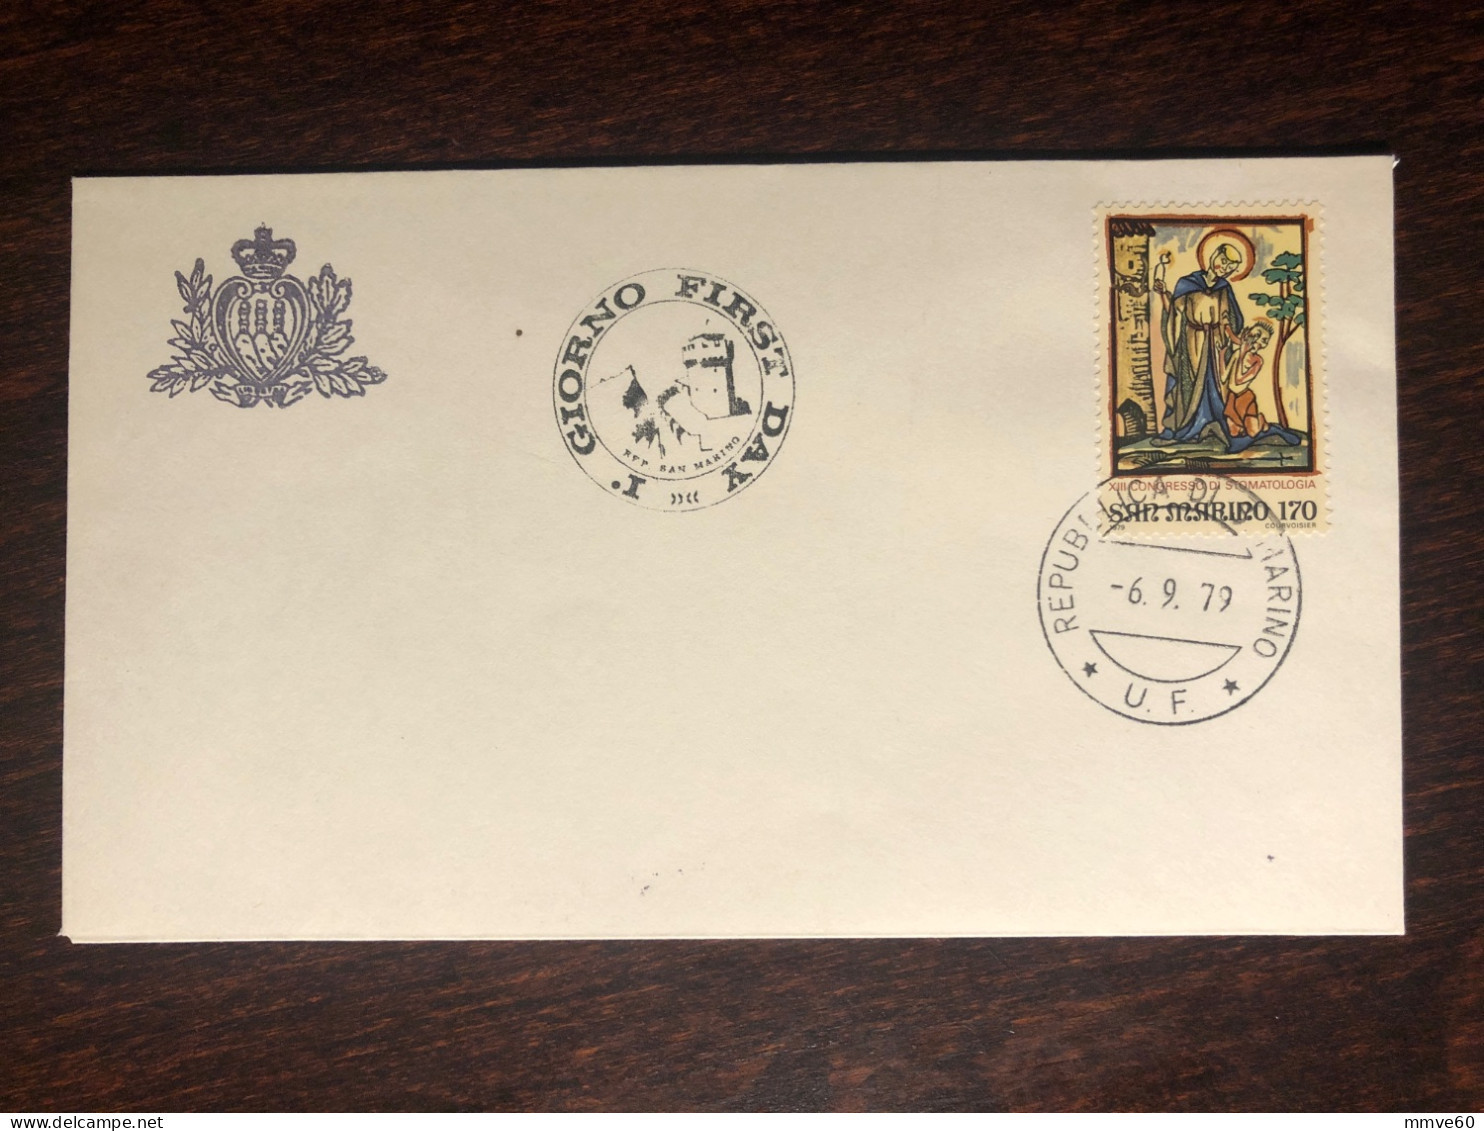 SAN MARINO FDC COVER 1979 YEAR DENTISTRY DENTAL HEALTH MEDICINE STAMPS - FDC